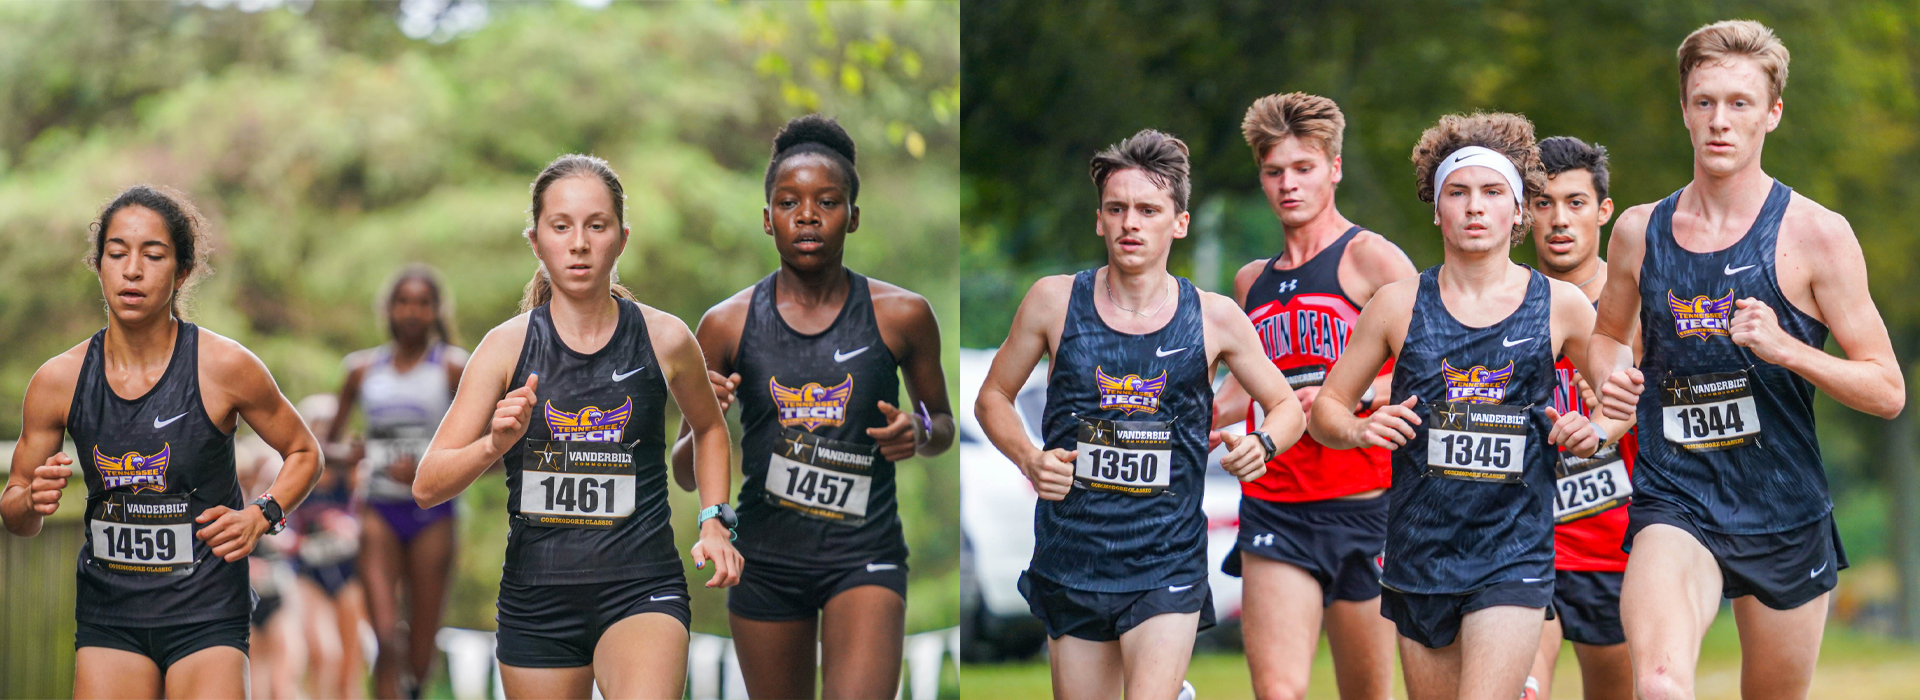 Tech cross country set to host Golden Eagle Invitational Friday afternoon